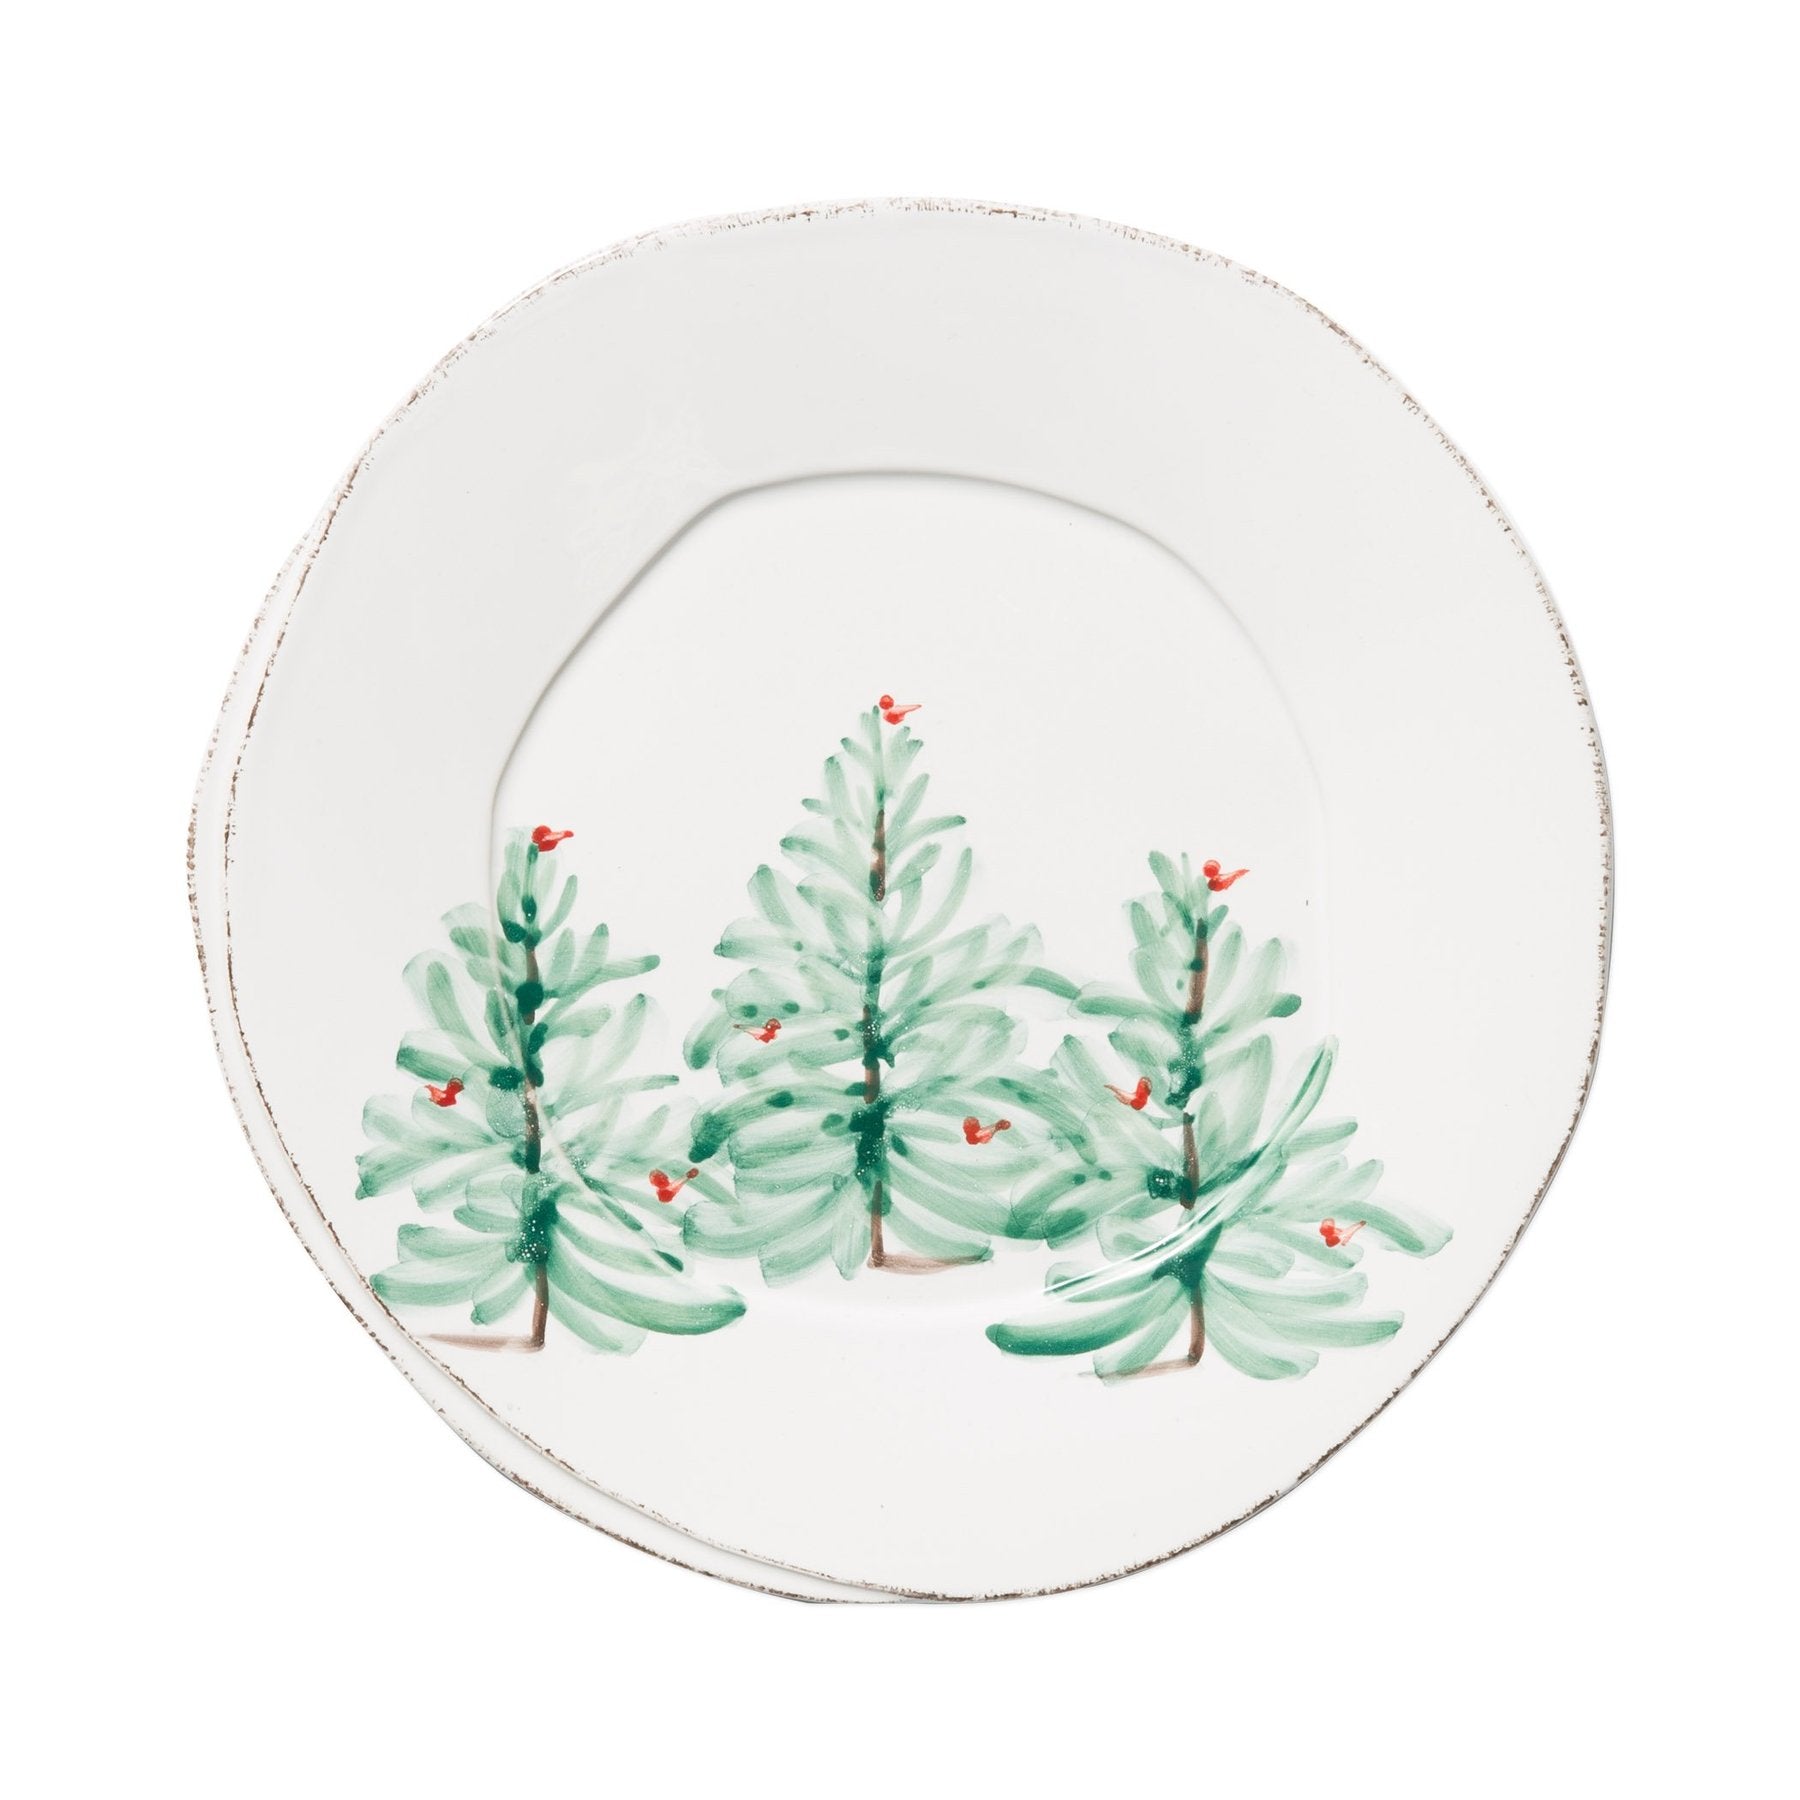 white dinner plate with green holiday trees in the center, on white background.